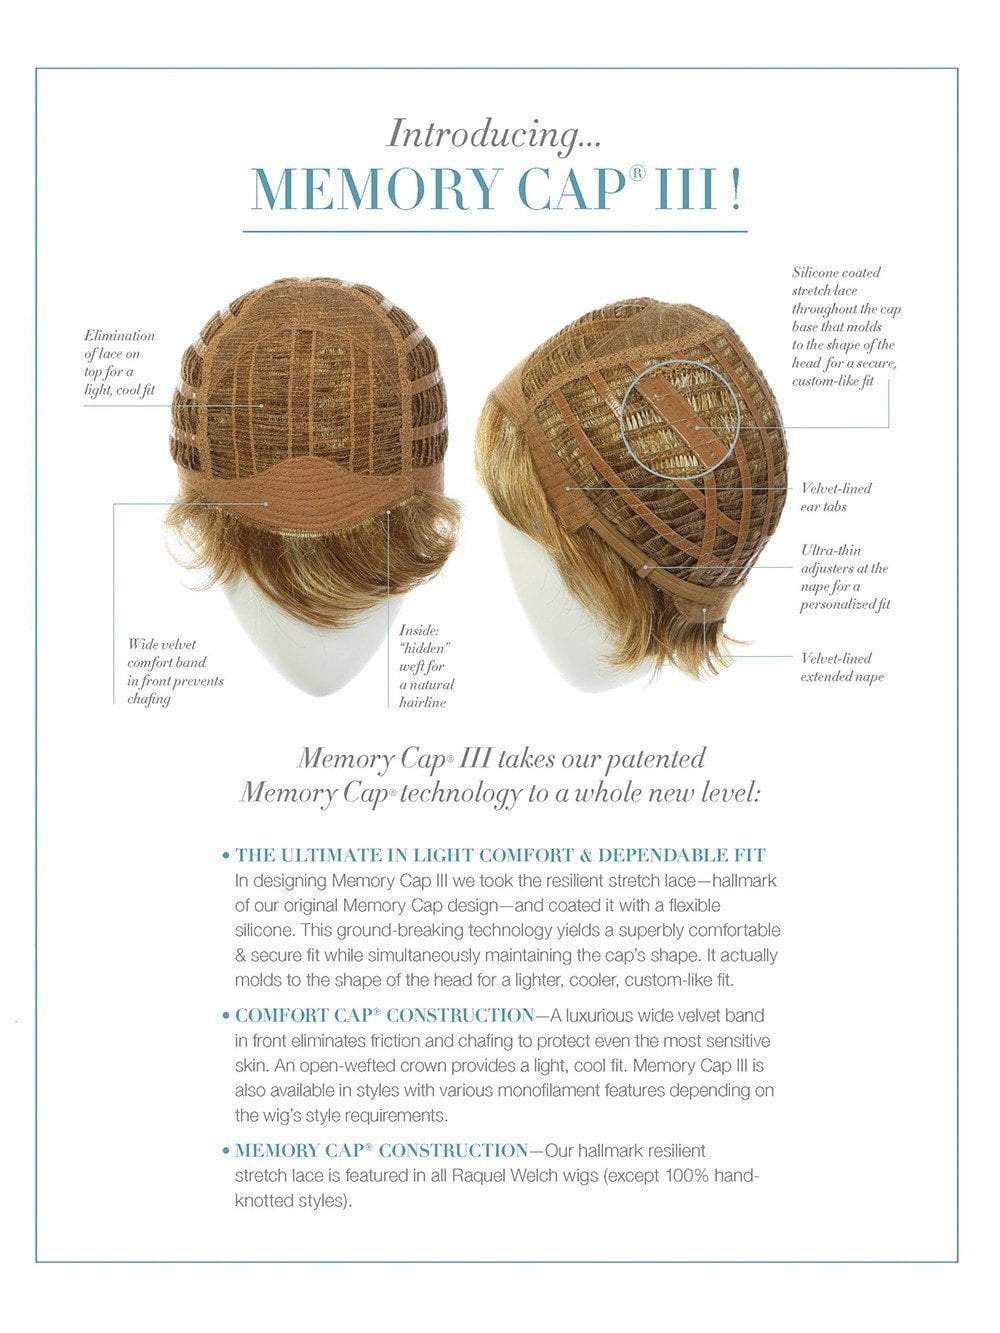 The new memory cap 3 offers the ultimate in light comfort and dependable fit. The resilient stretch lace - hallmark of the Memory Cap design, is silicone coated and flexible